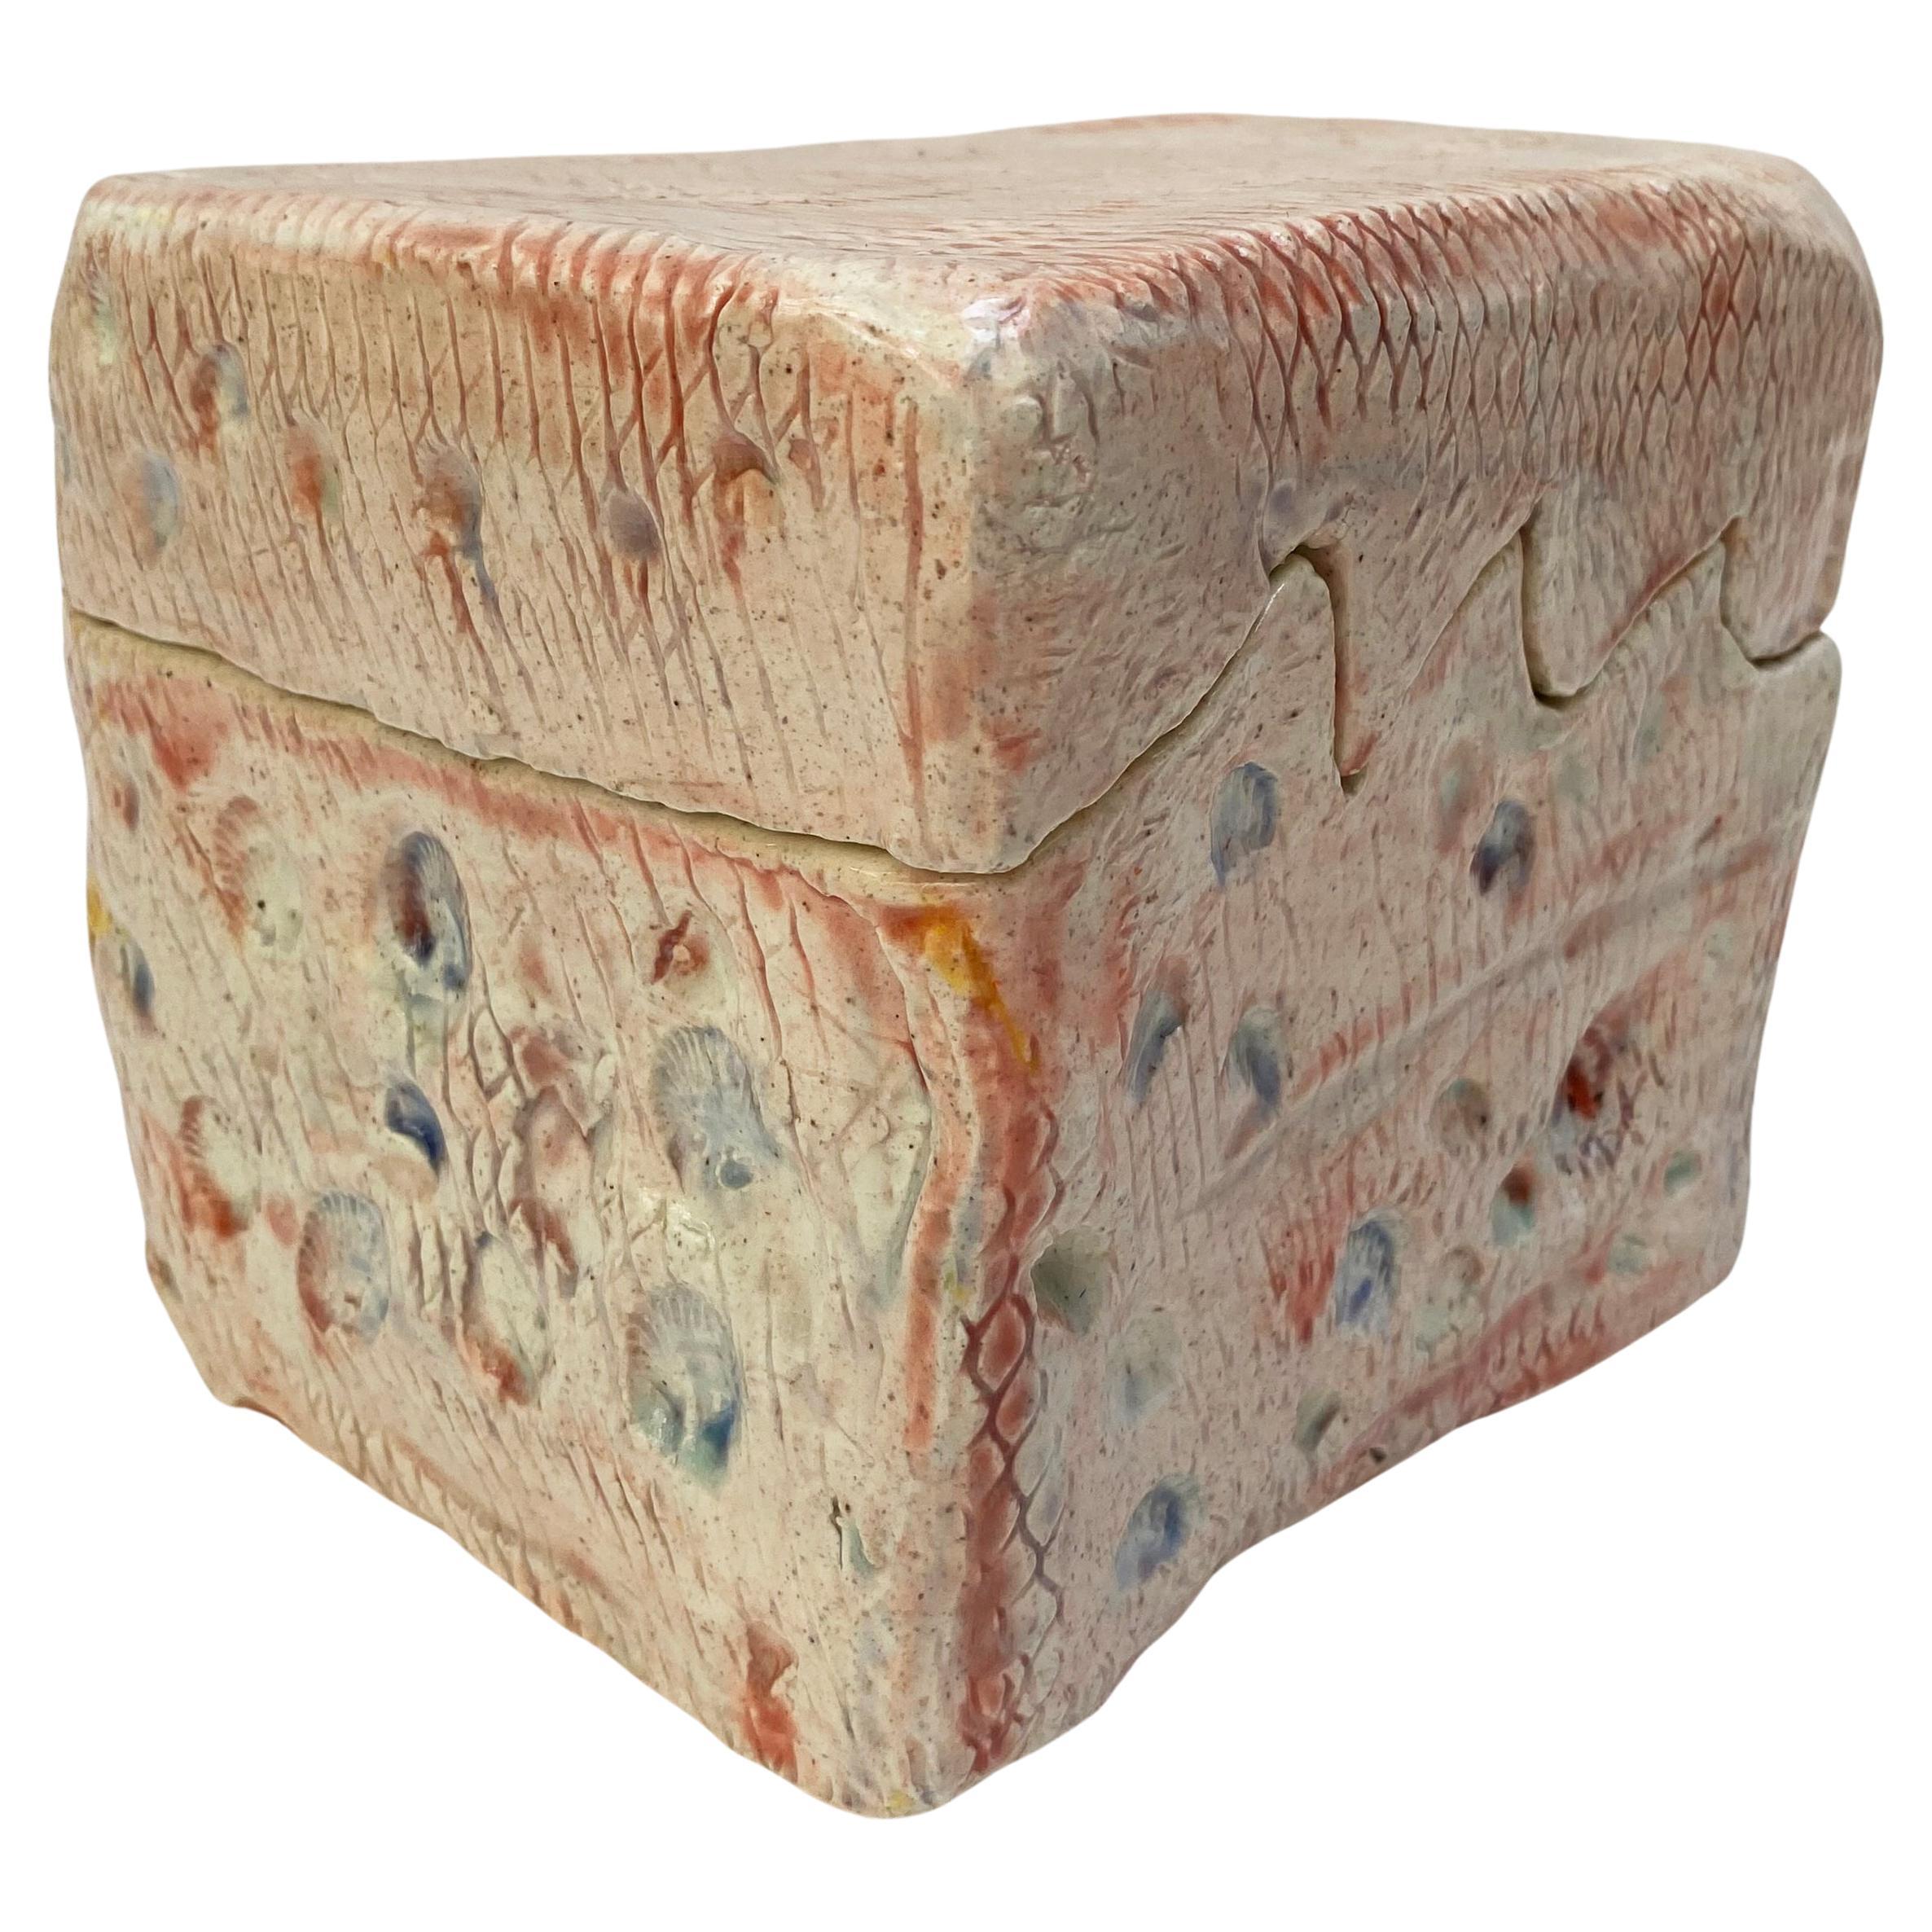 Hand Made Abstract Sculptural Glazed Ceramic Box. Fitted Lid